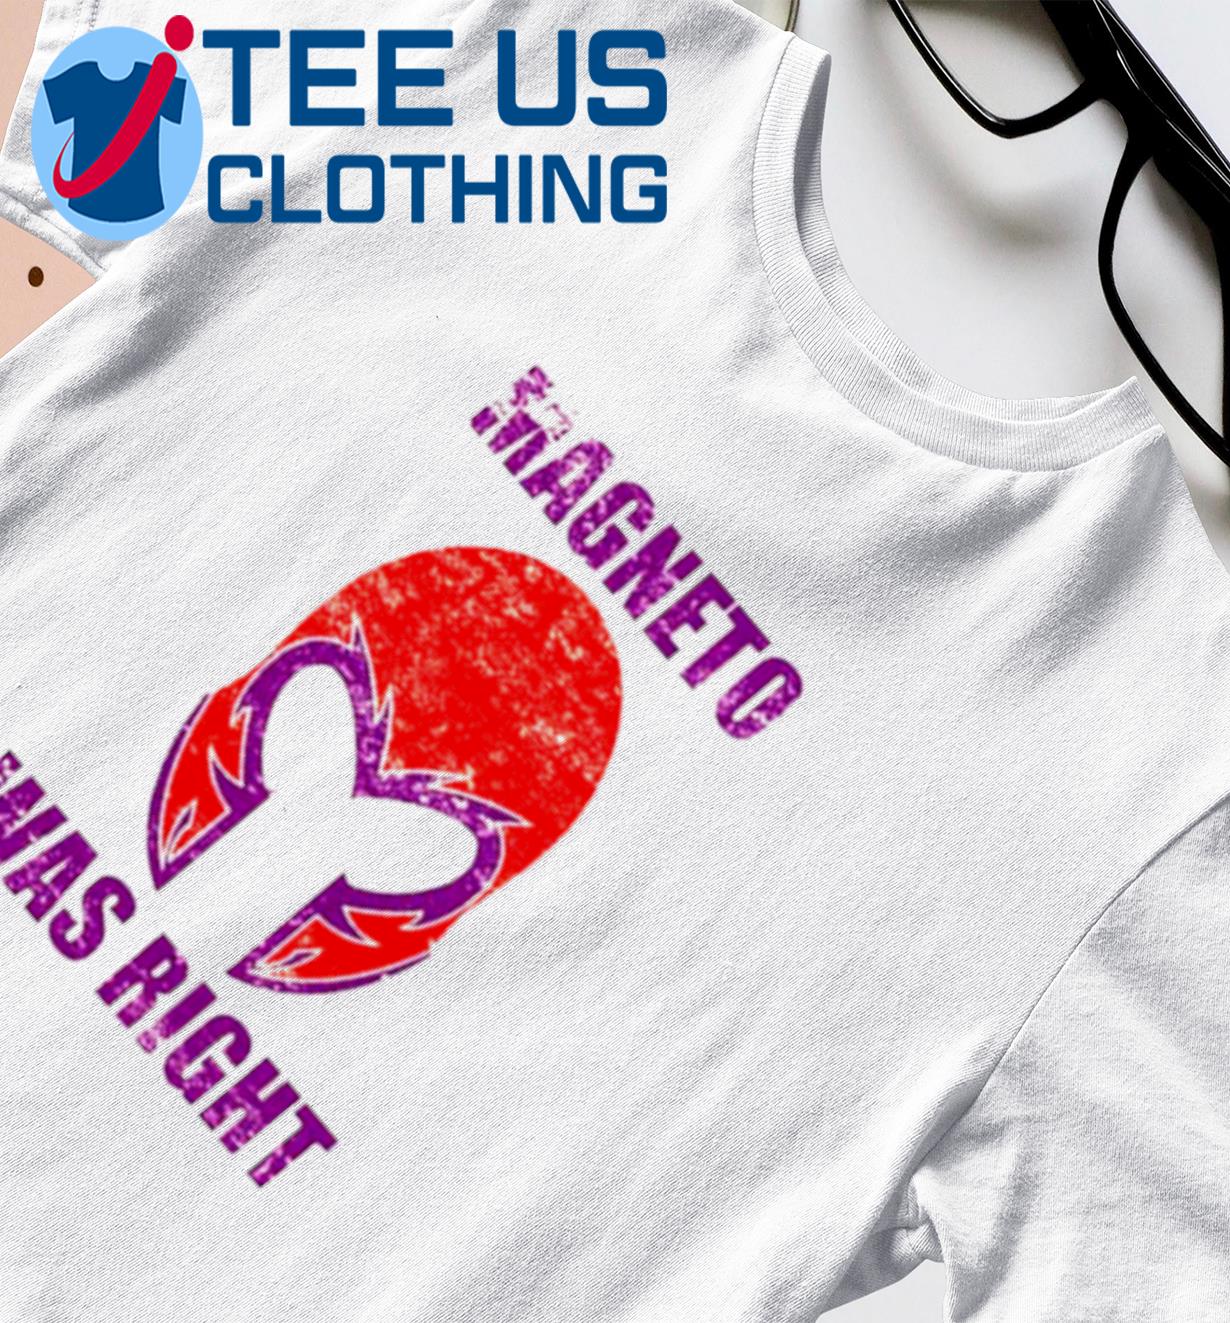 Magneto was right mask shirt